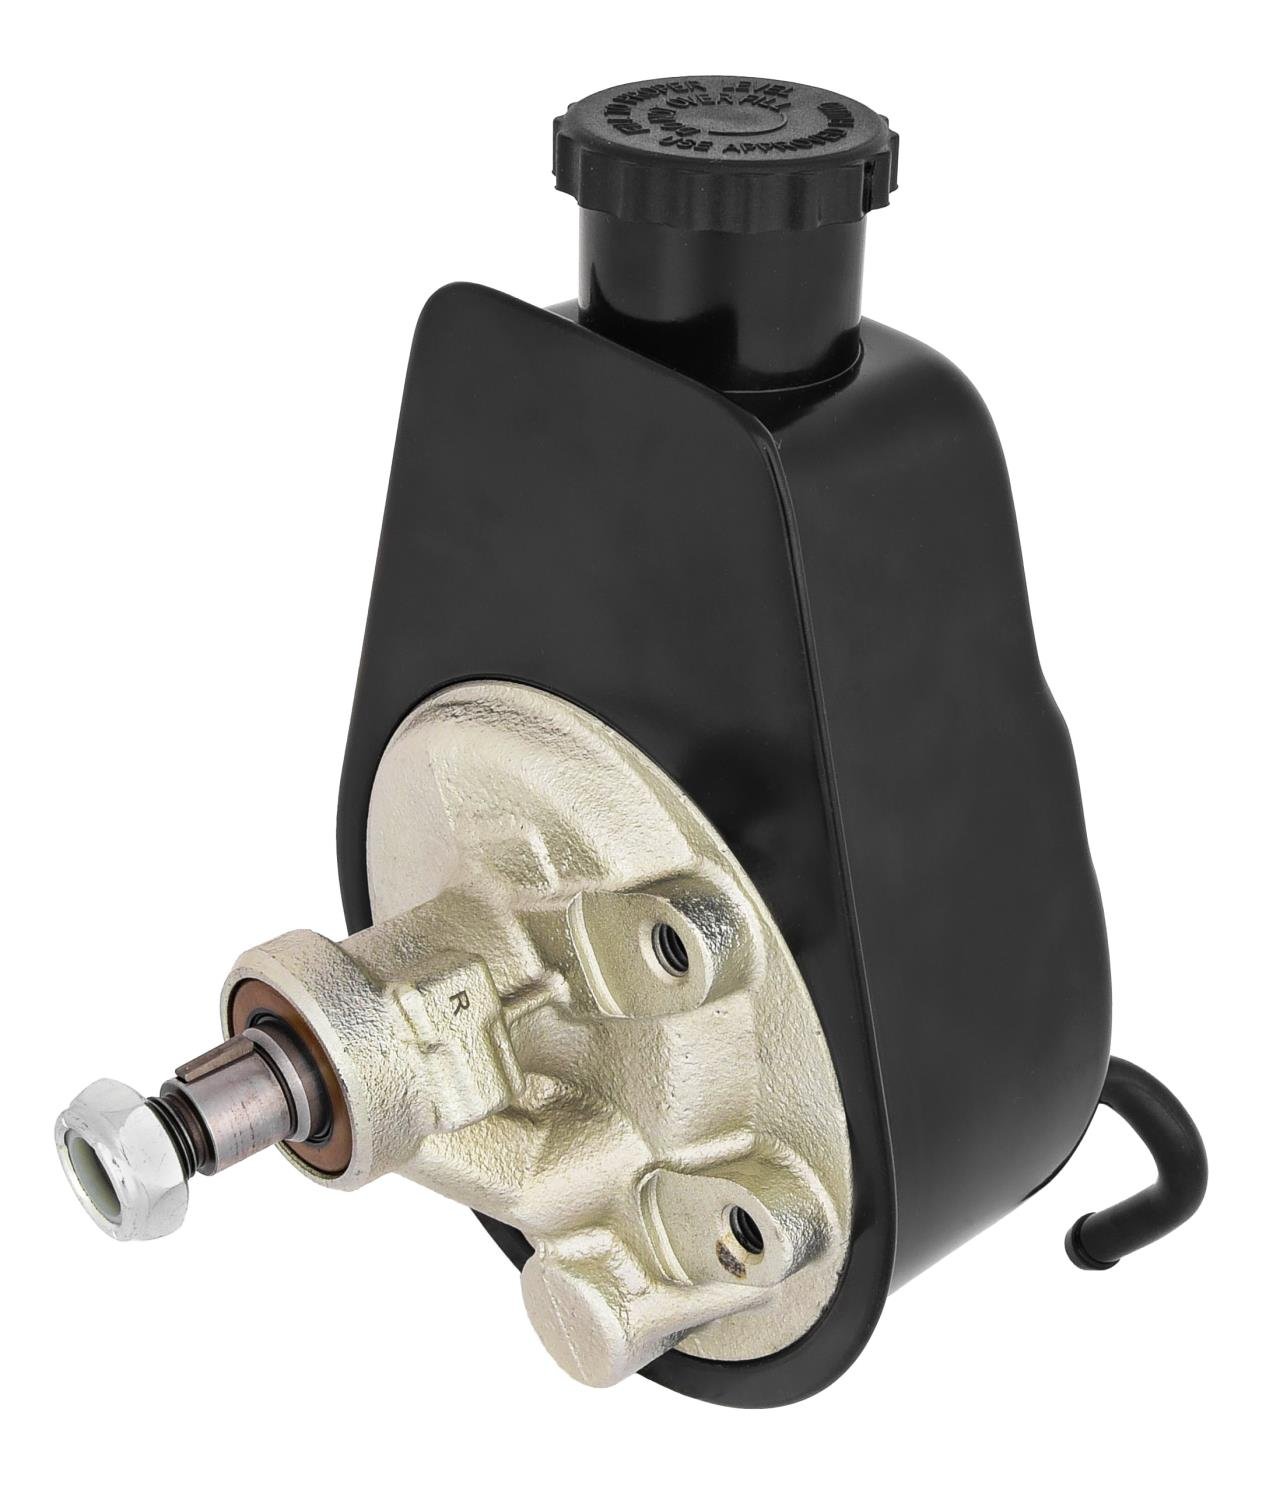 Saginaw-Style Power Steering Pump w/Keyed Shaft for Select 1966-1976 GM Vehicles [Black]